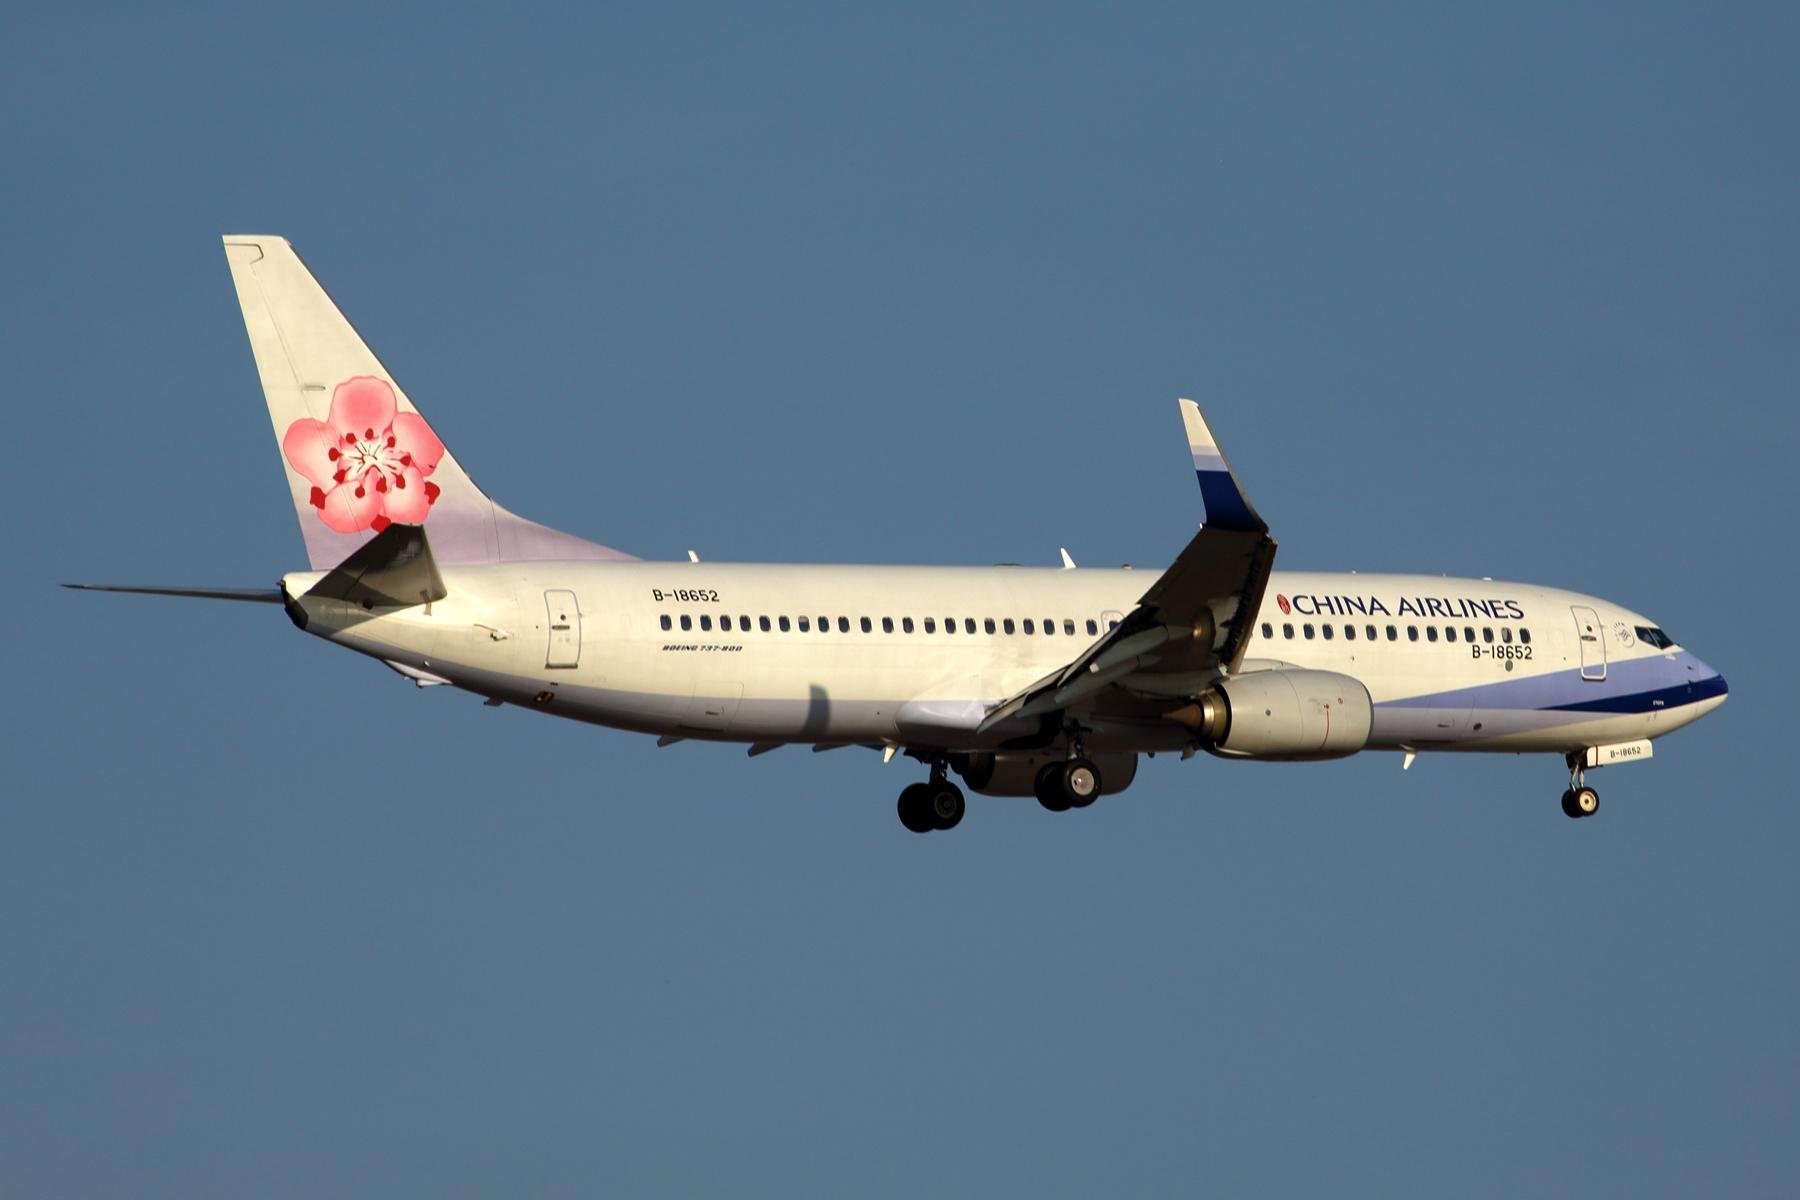 China Airlines Boeing 737-800